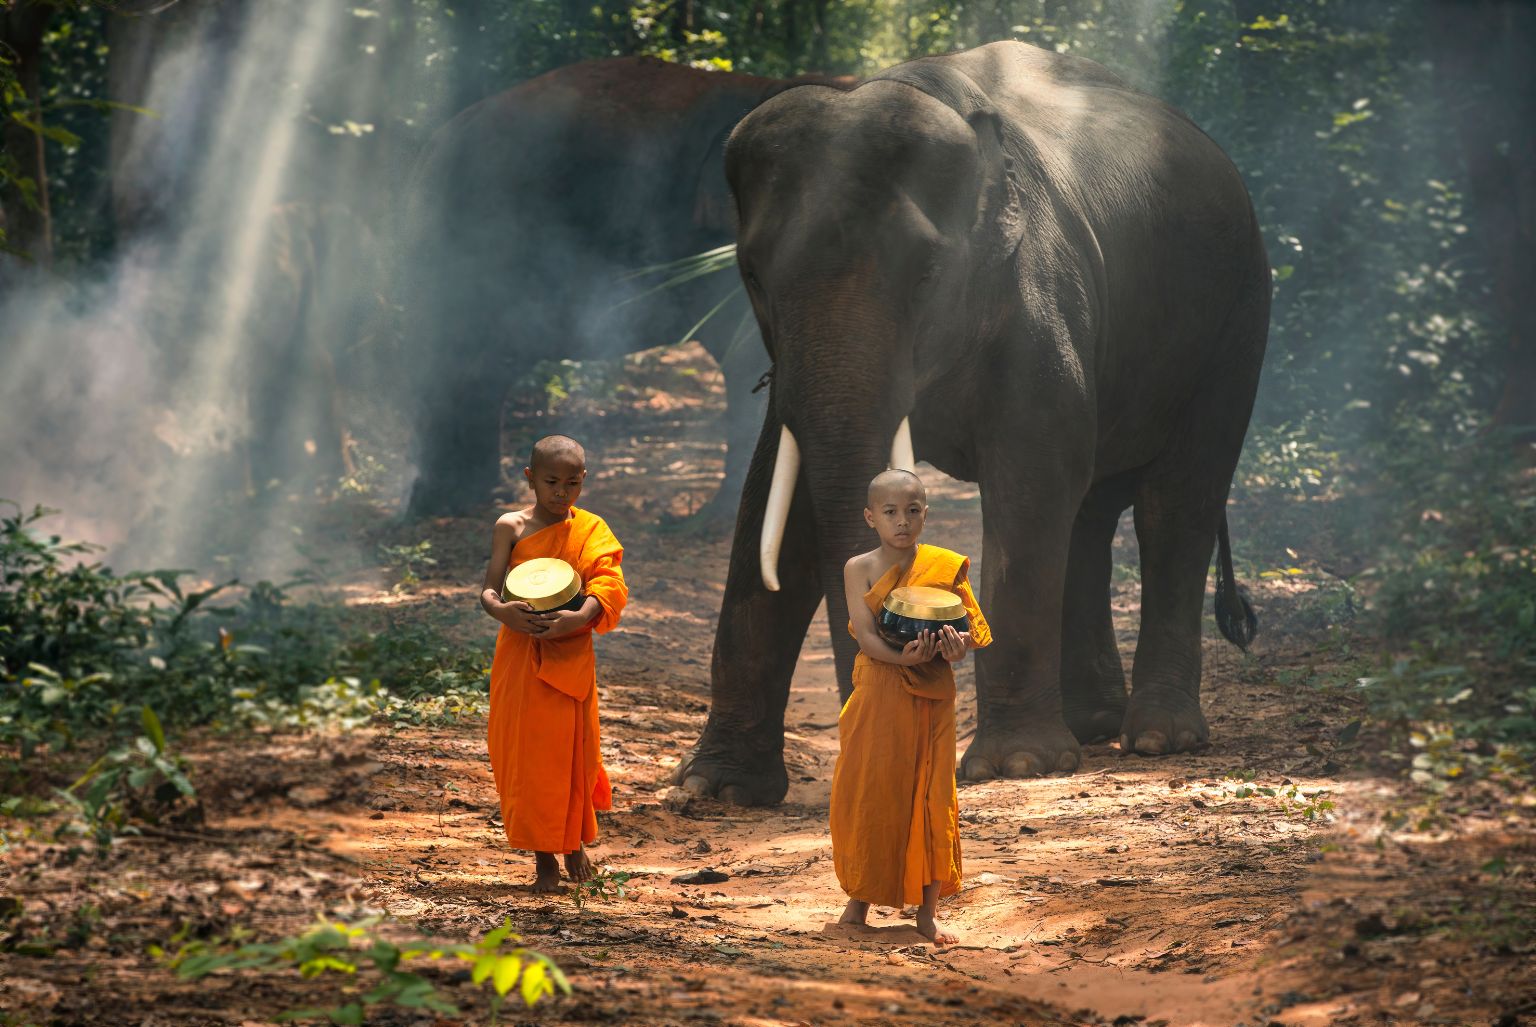 Two young boy buddhist monks walking in a forest with a huge elephant following after them